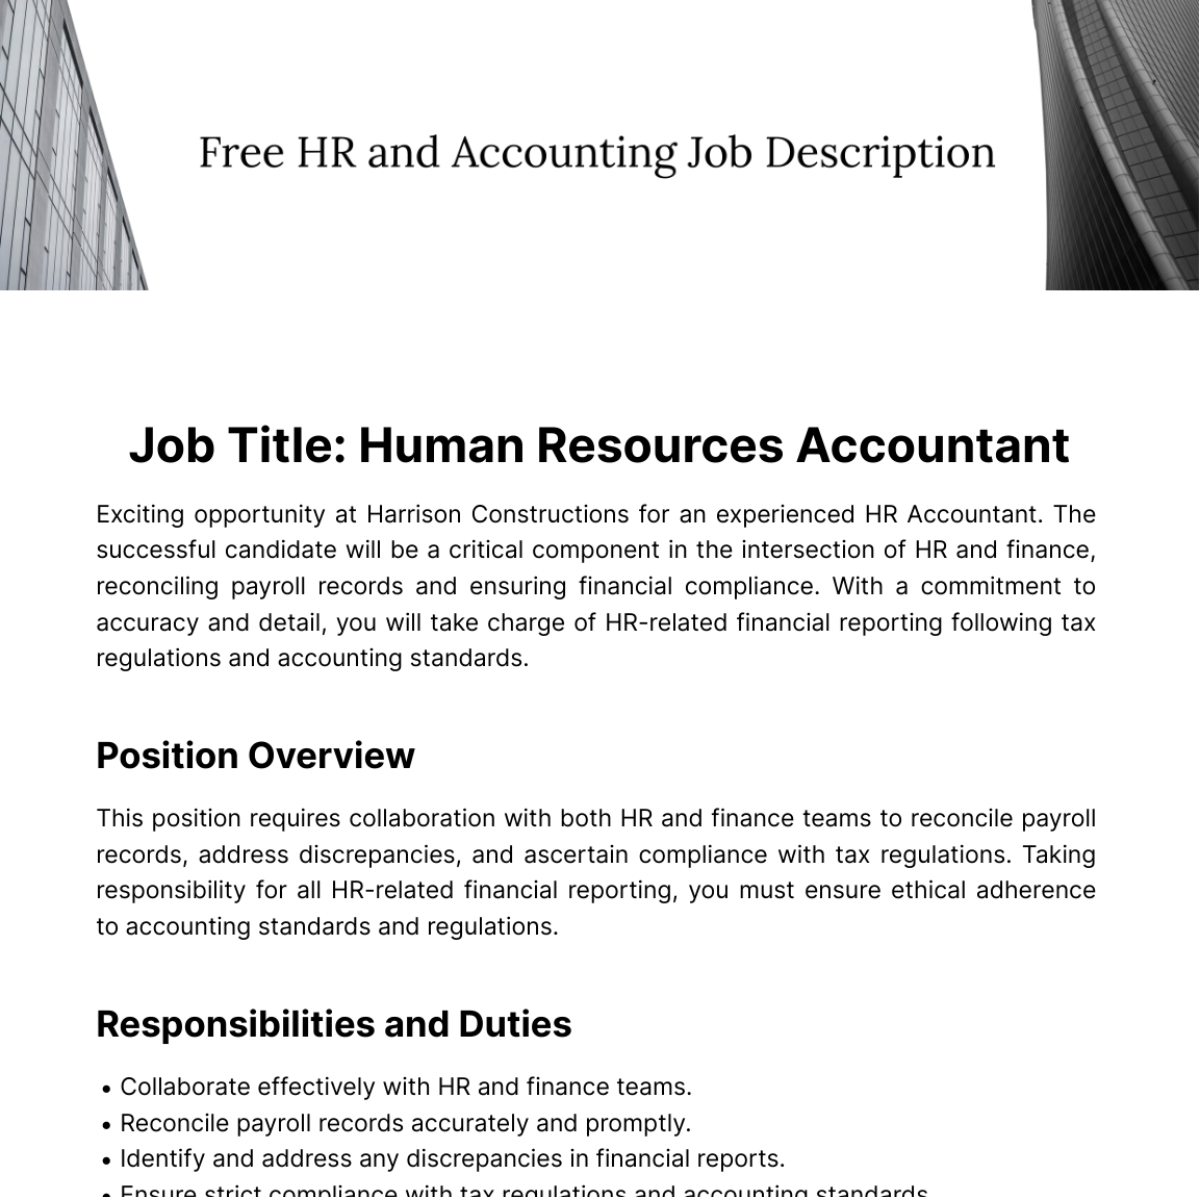 HR and Accounting Job Description Template